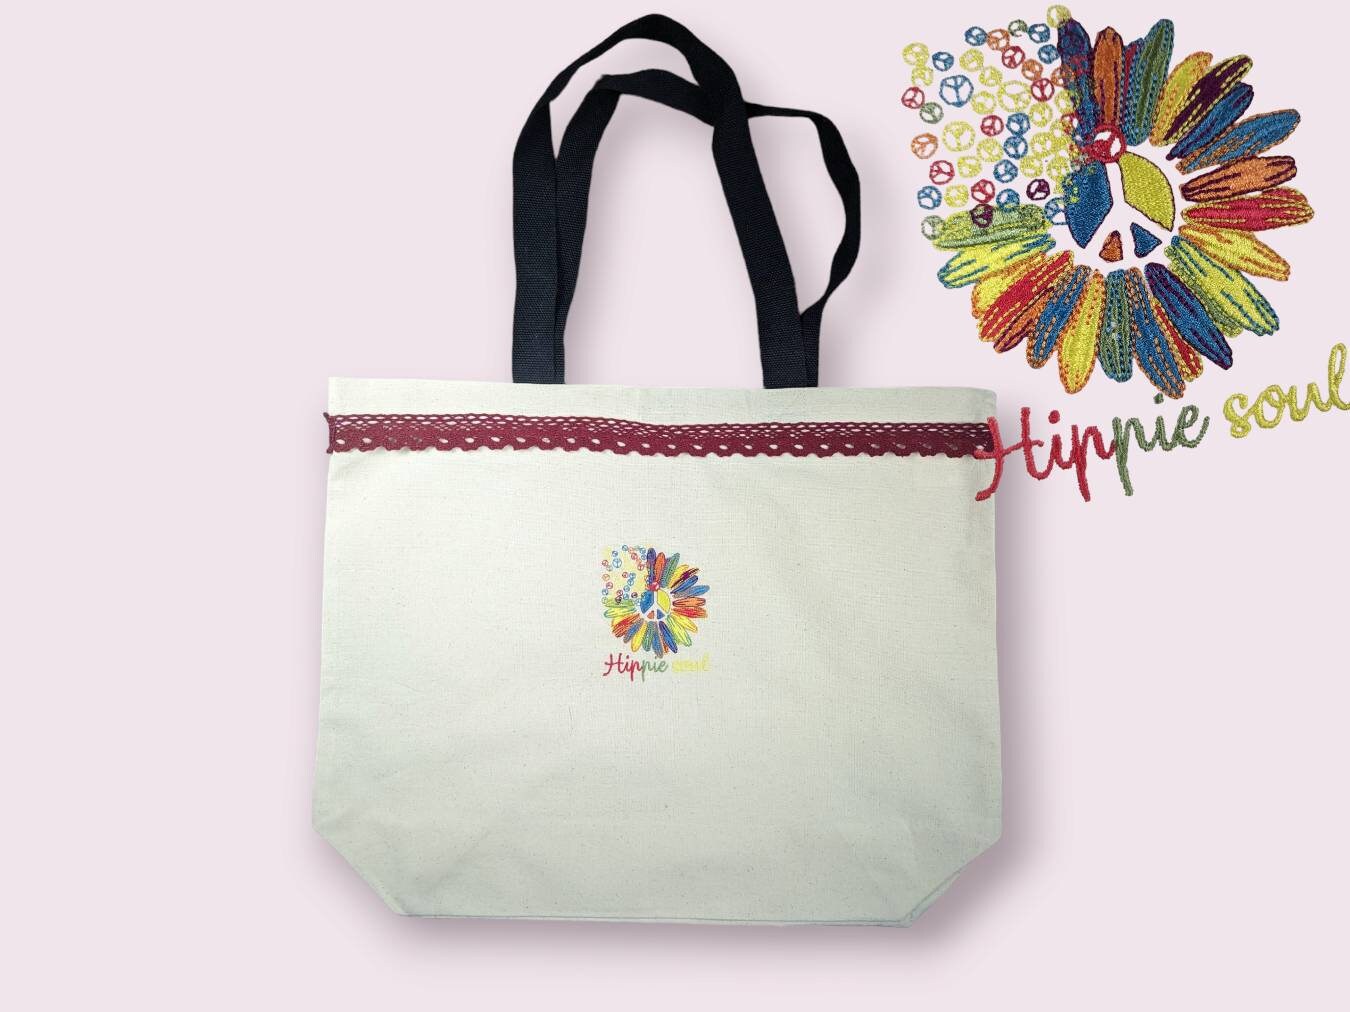 Embroidered tote bag, hippie tote bag, peace sign embroidery, bohemian tote bag, XL tote bag, good vibes, positive vibes, free spirit tote